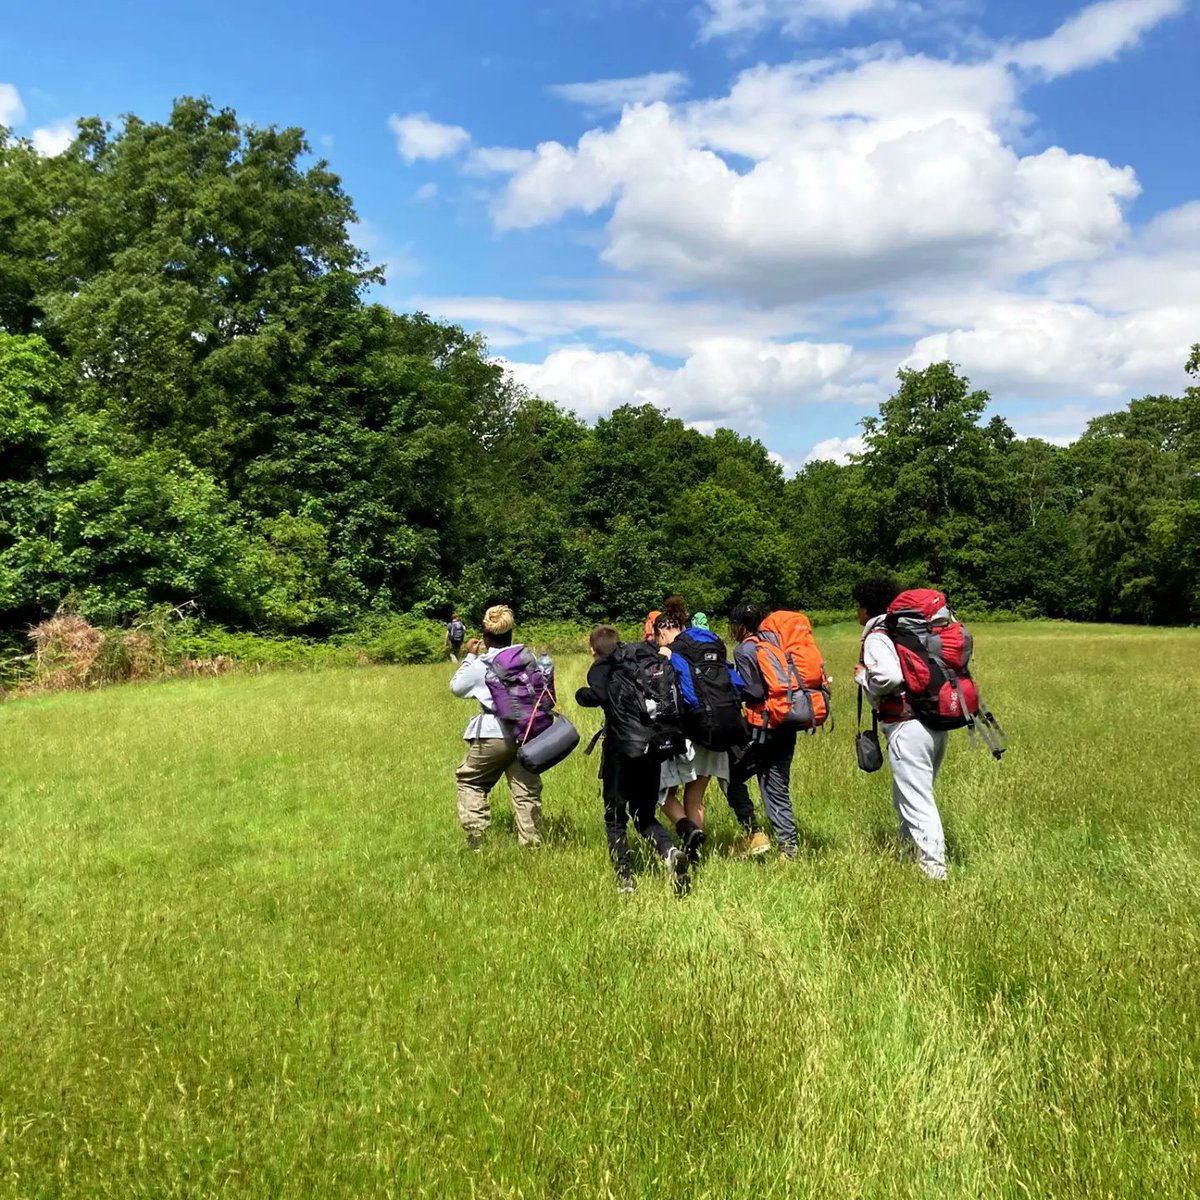 Students are enjoying the weather on their #DofE expedition this weekend!